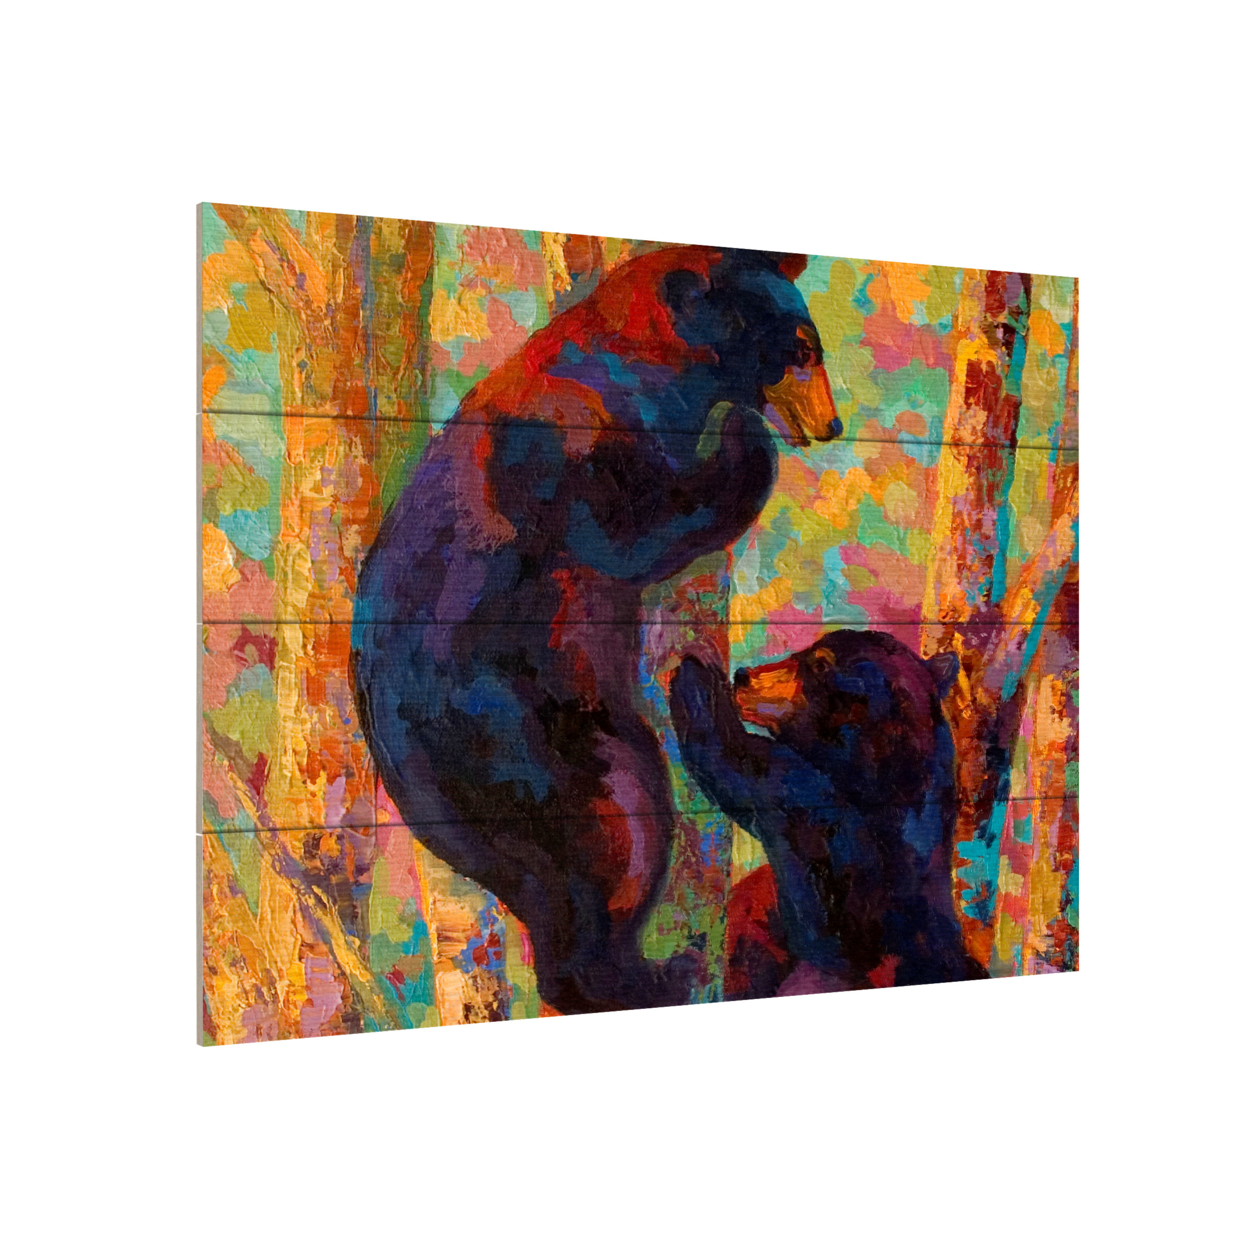 Wall Art 12 X 16 Inches Titled Two High Ready To Hang Printed On Wooden Planks